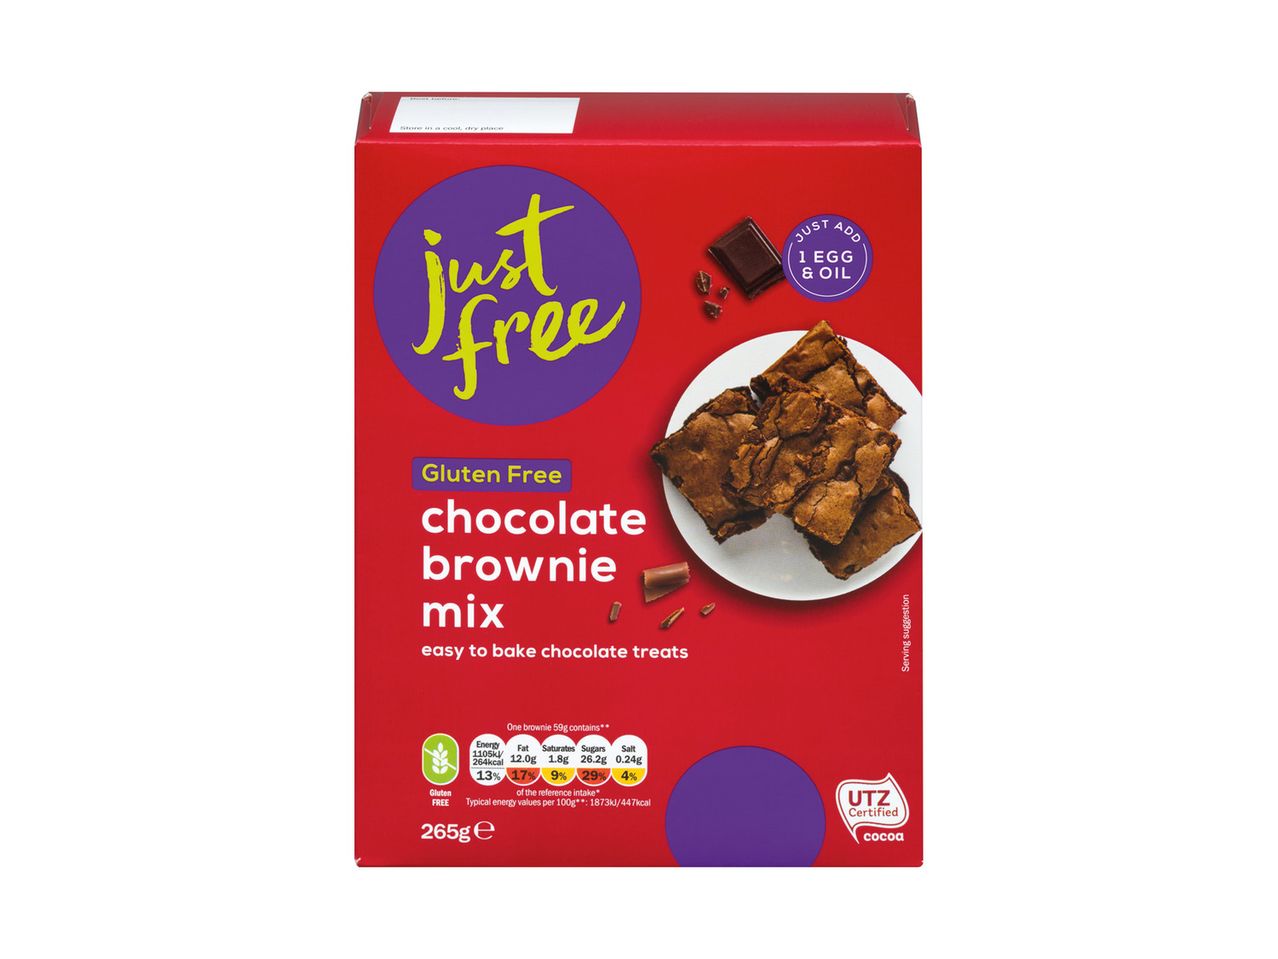 Go to full screen view: Just Free Chocolate Brownie Mix - Image 1